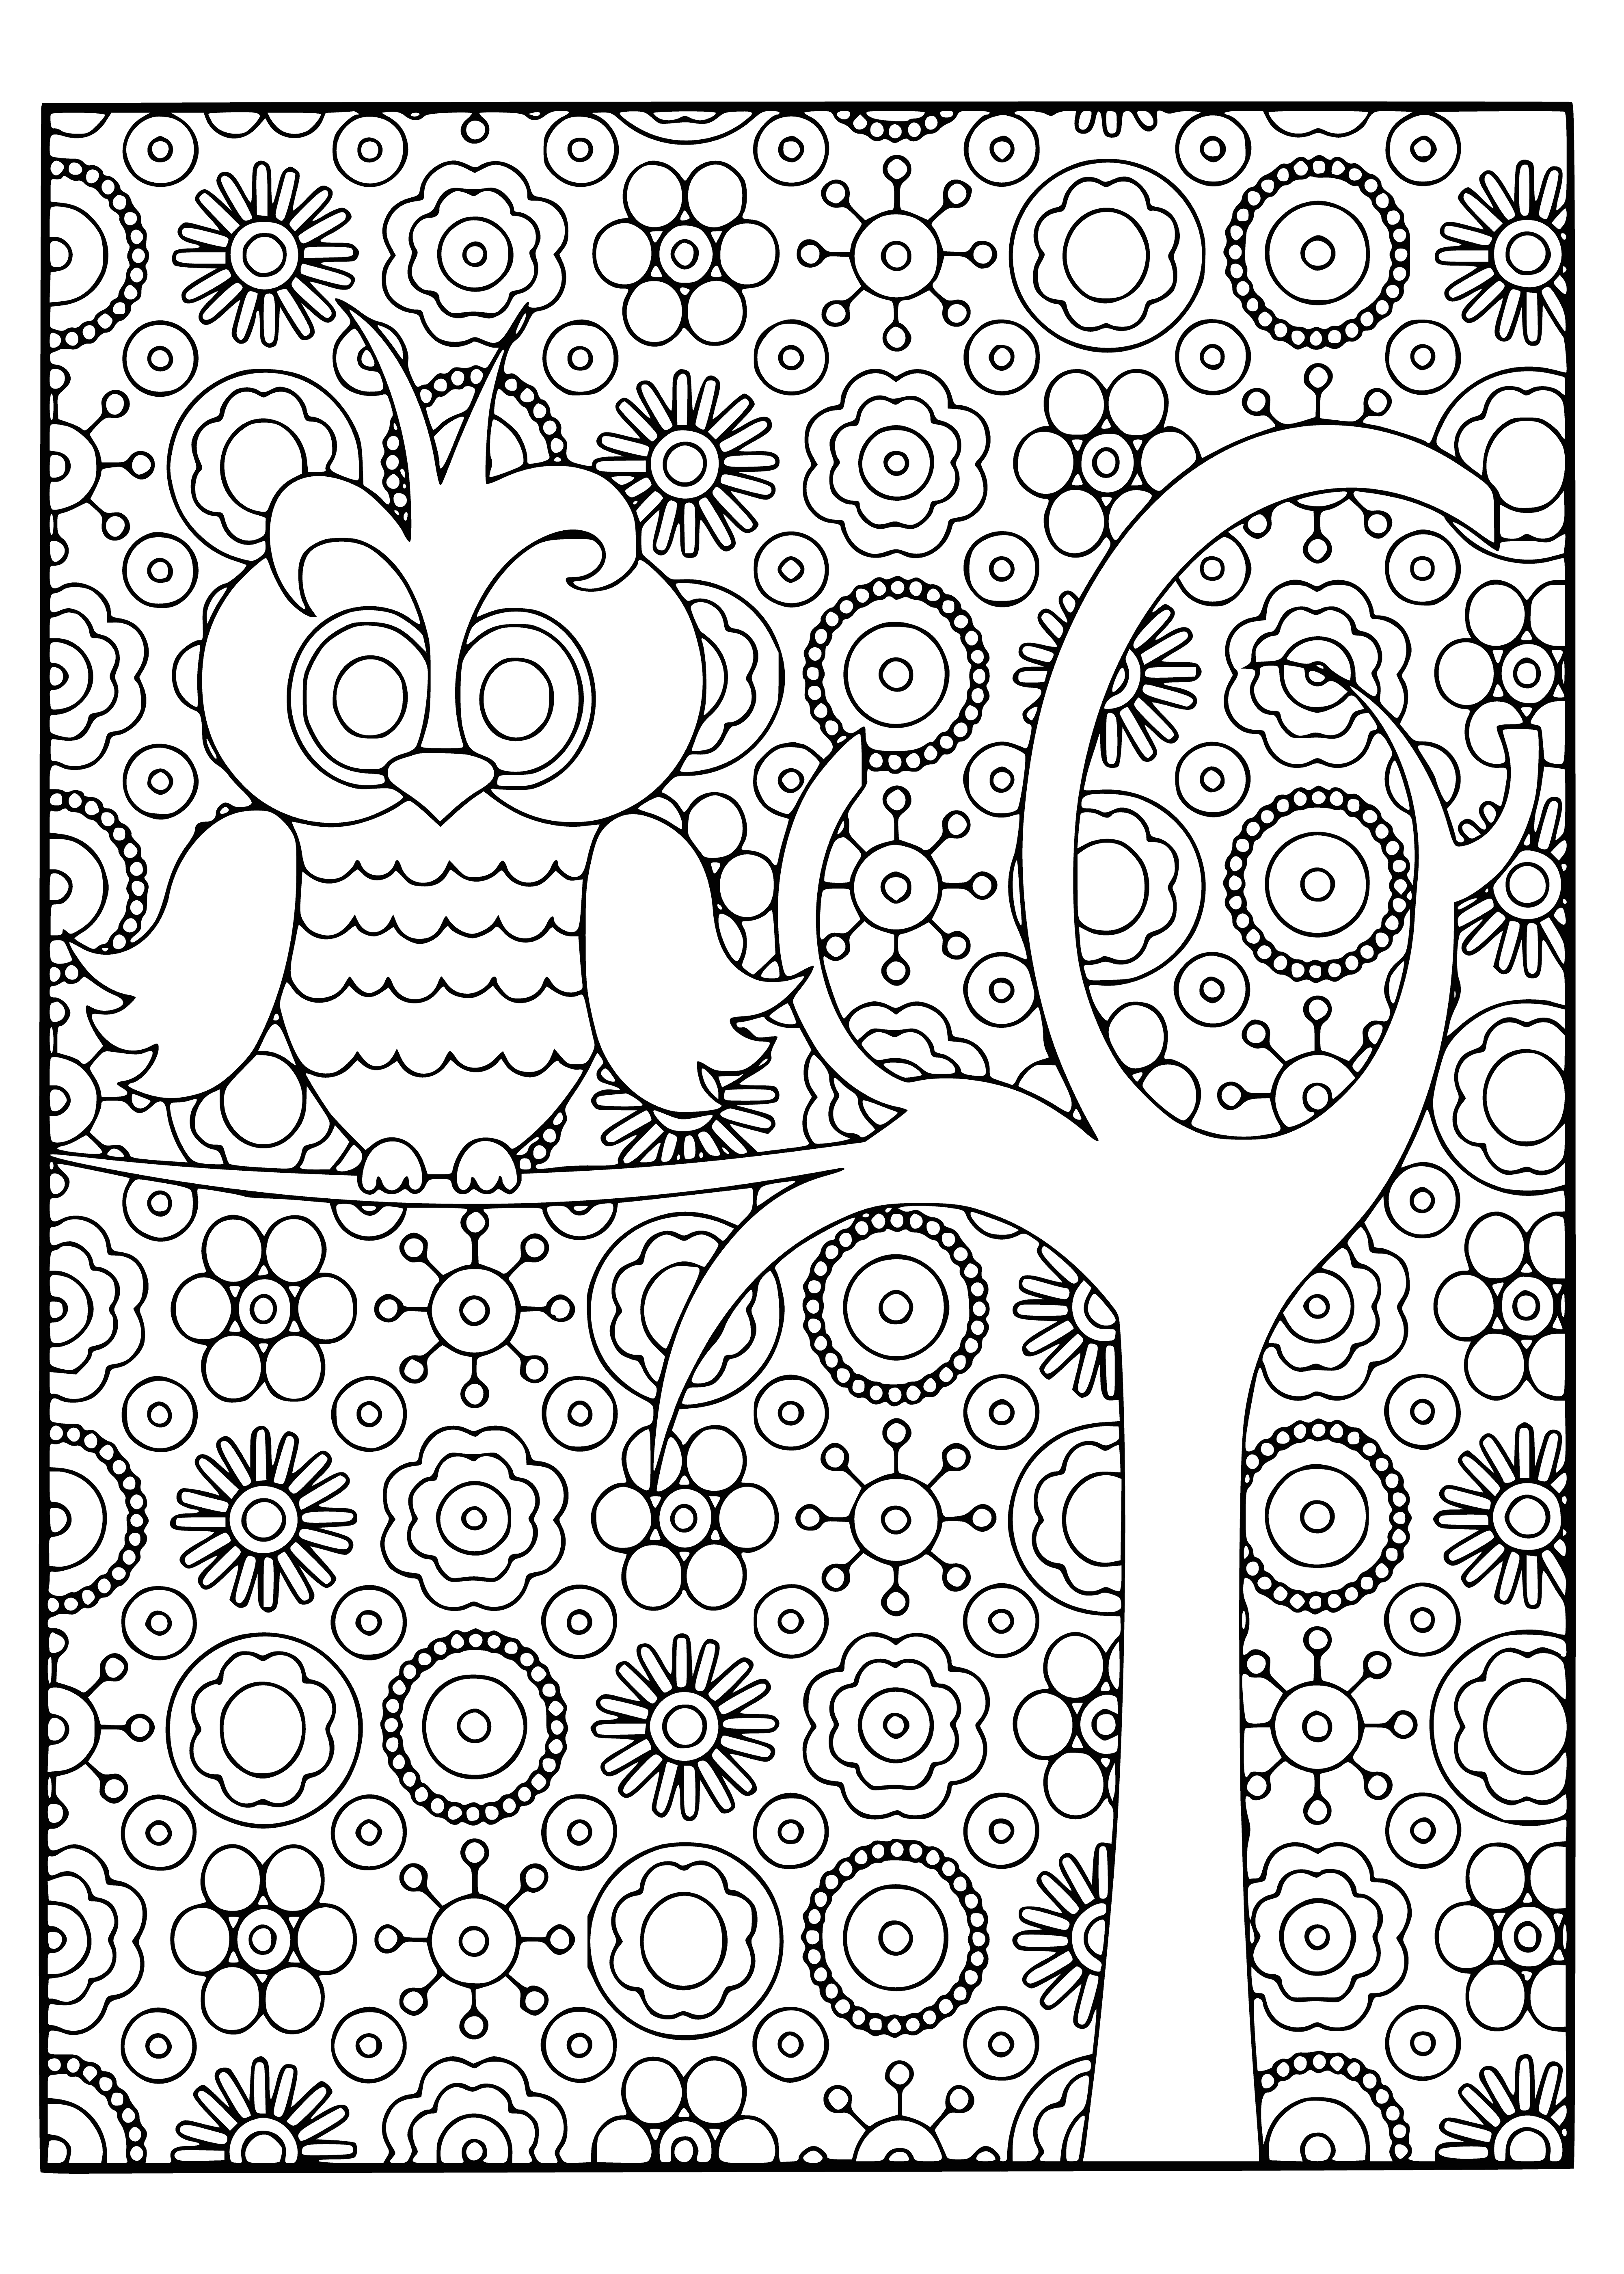 Owl on the tree coloring page